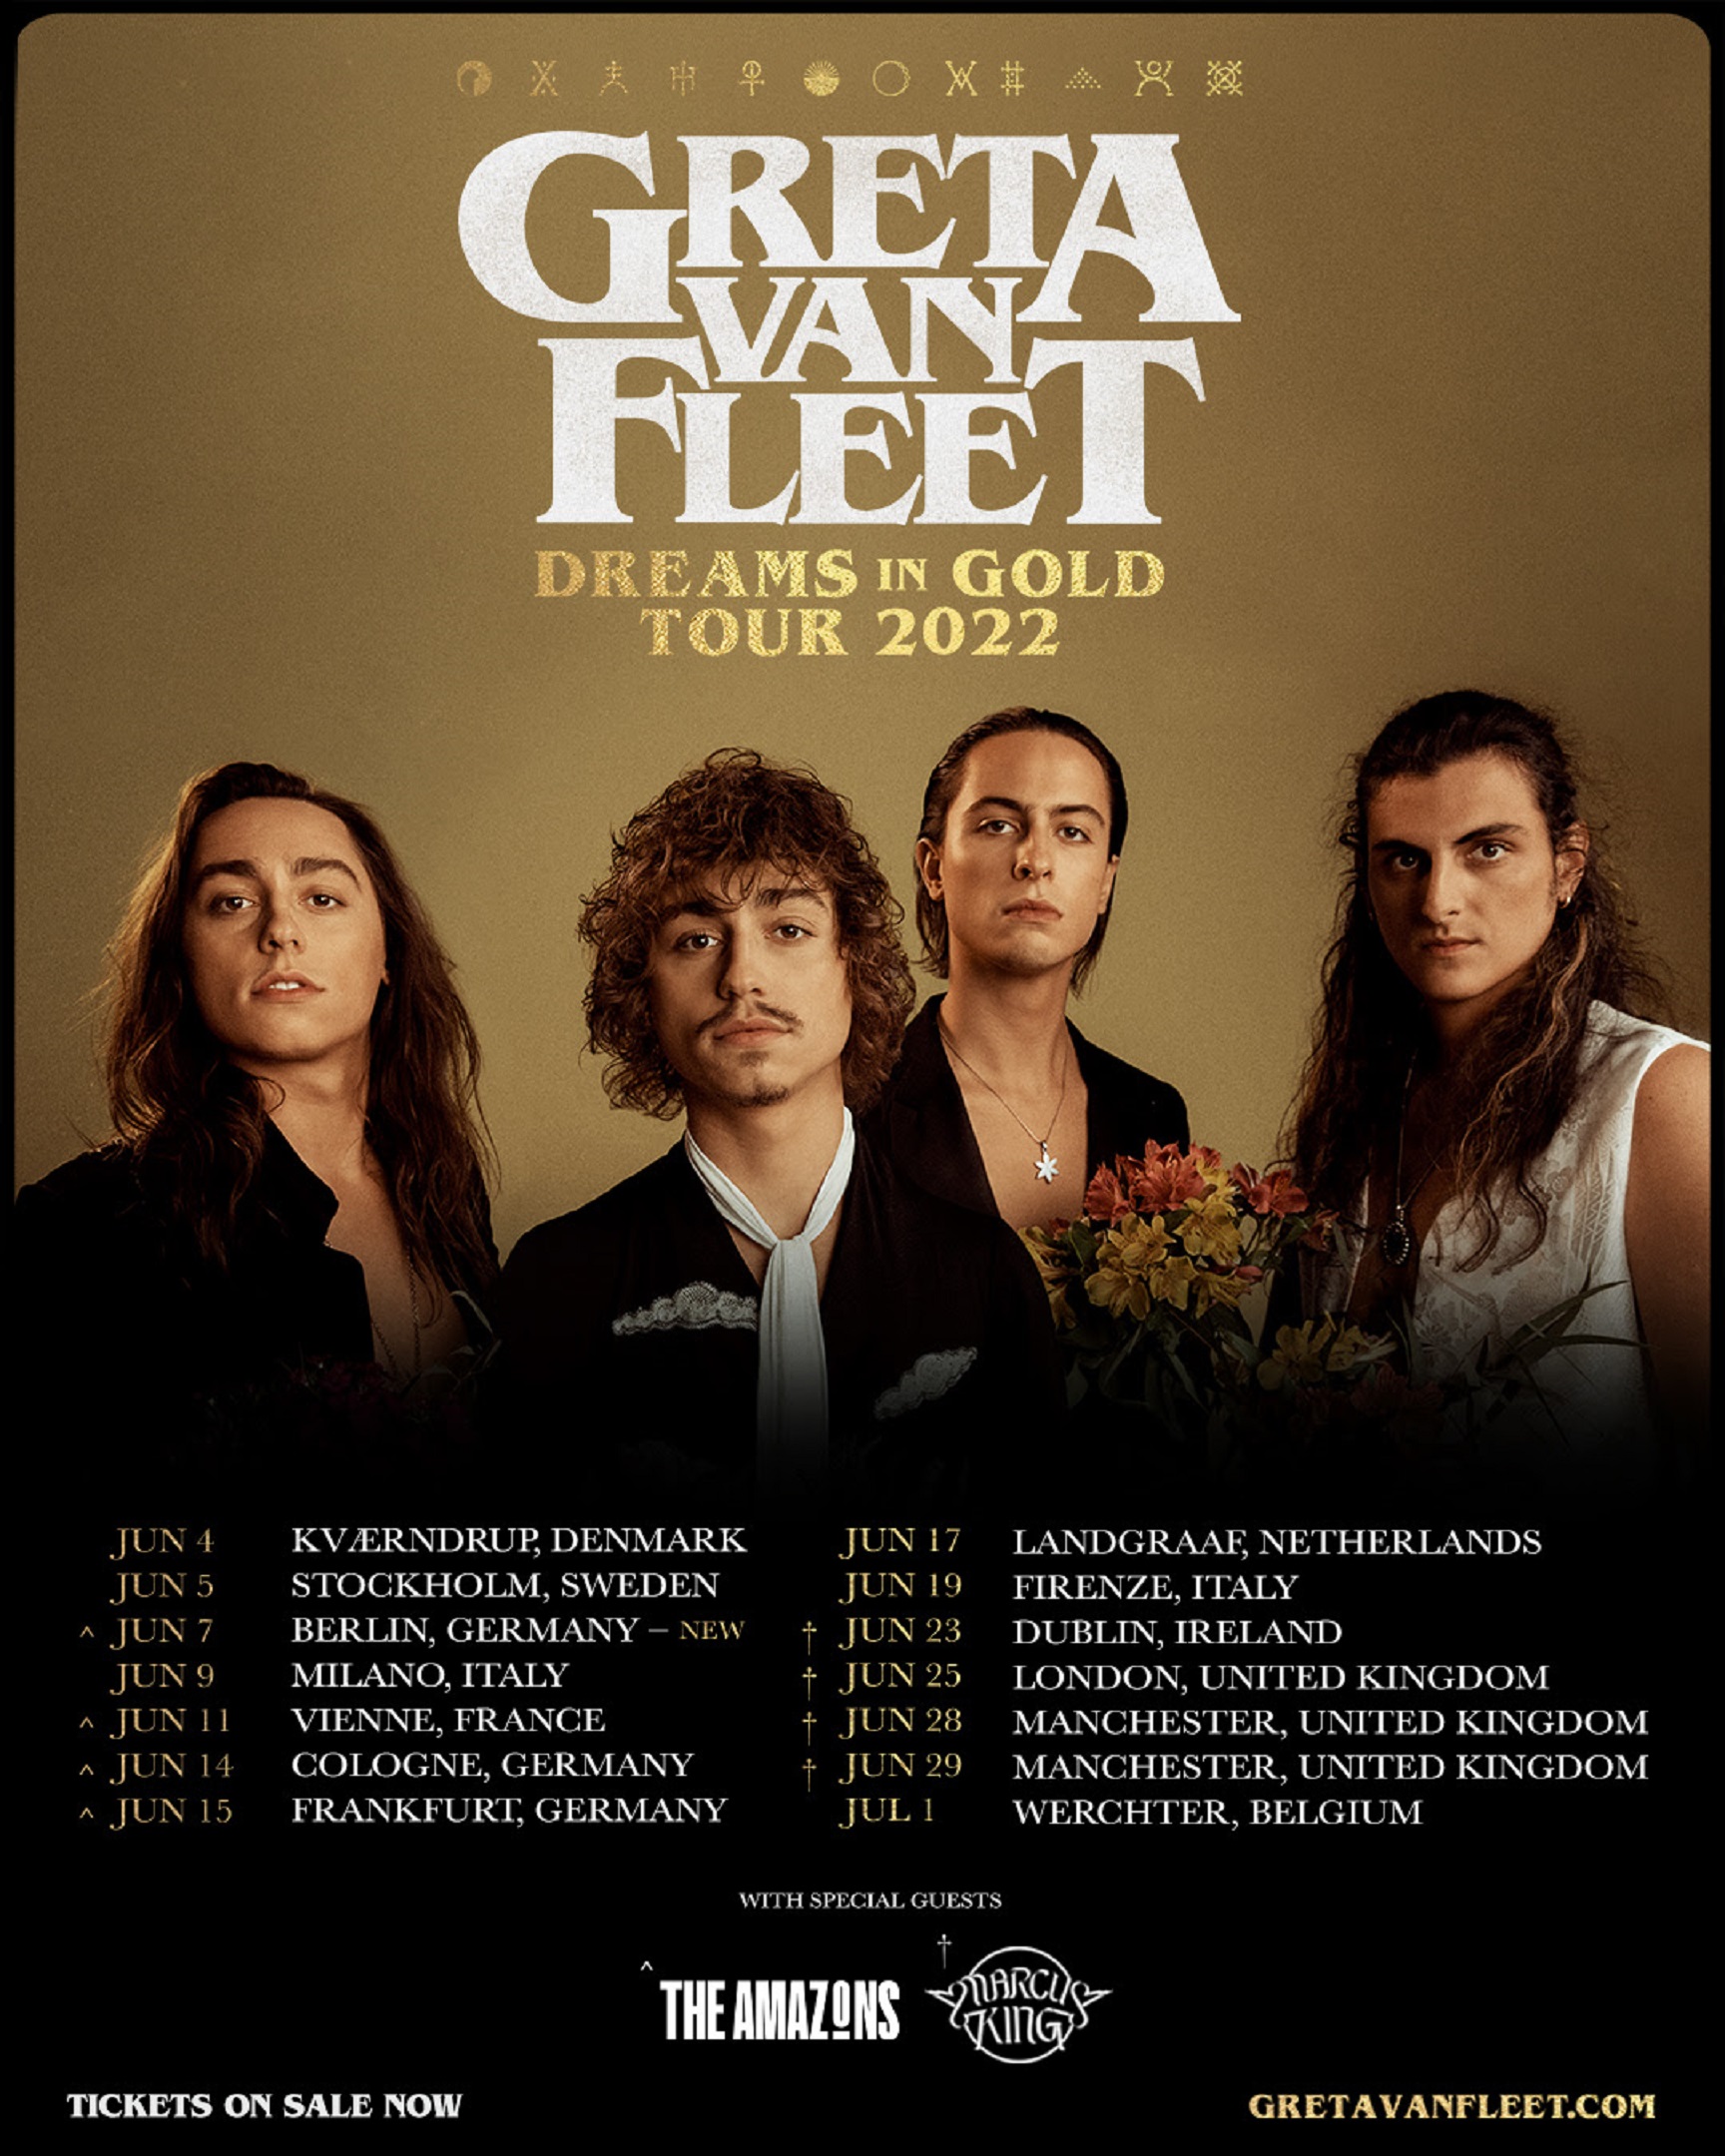 Greta Van Fleet announce The Amazons & Marcus King as Special Guests